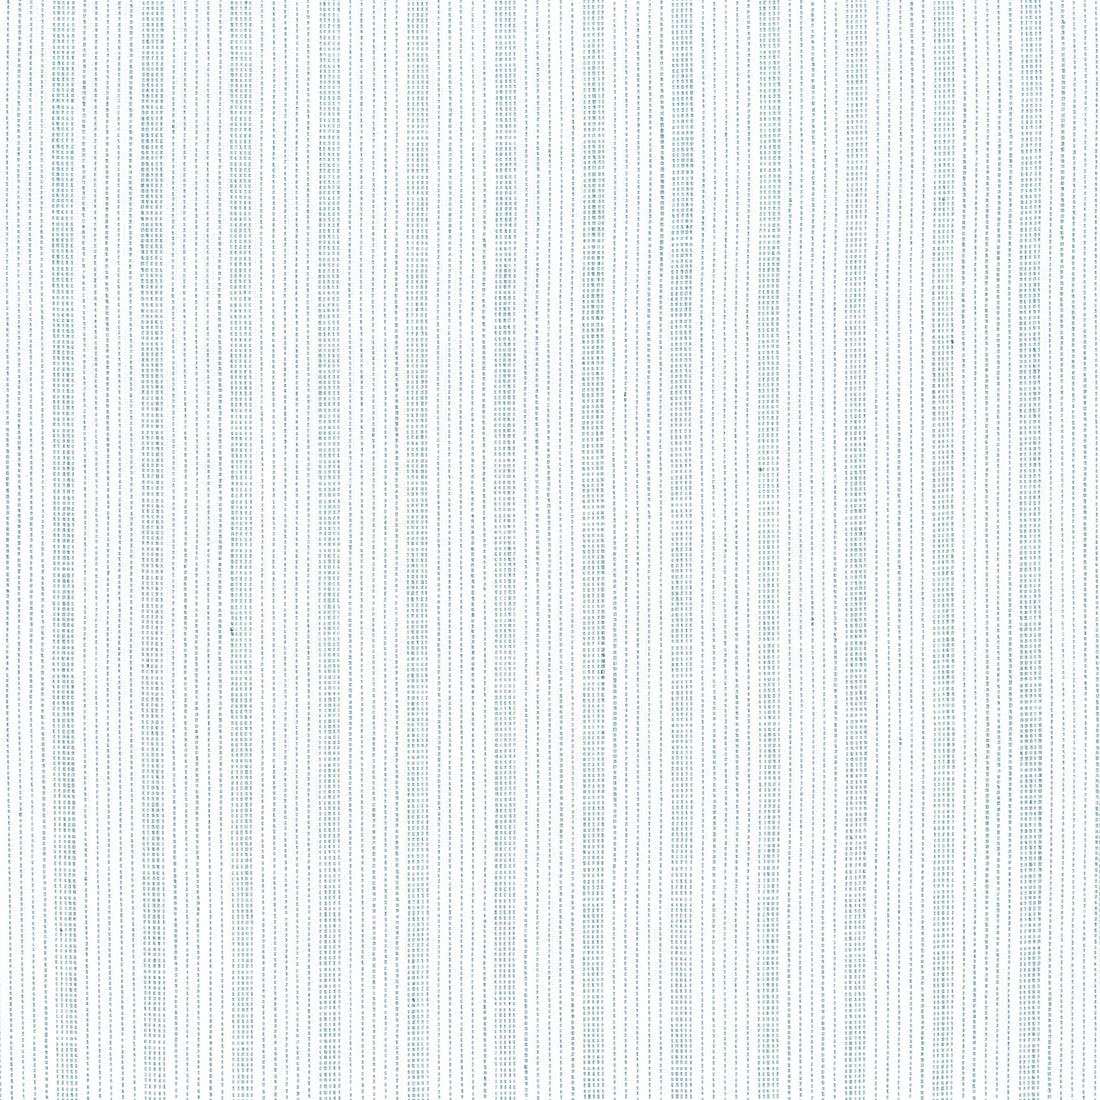 Ebro Stripe fabric in spa color - pattern number W8514 - by Thibaut in the Villa collection